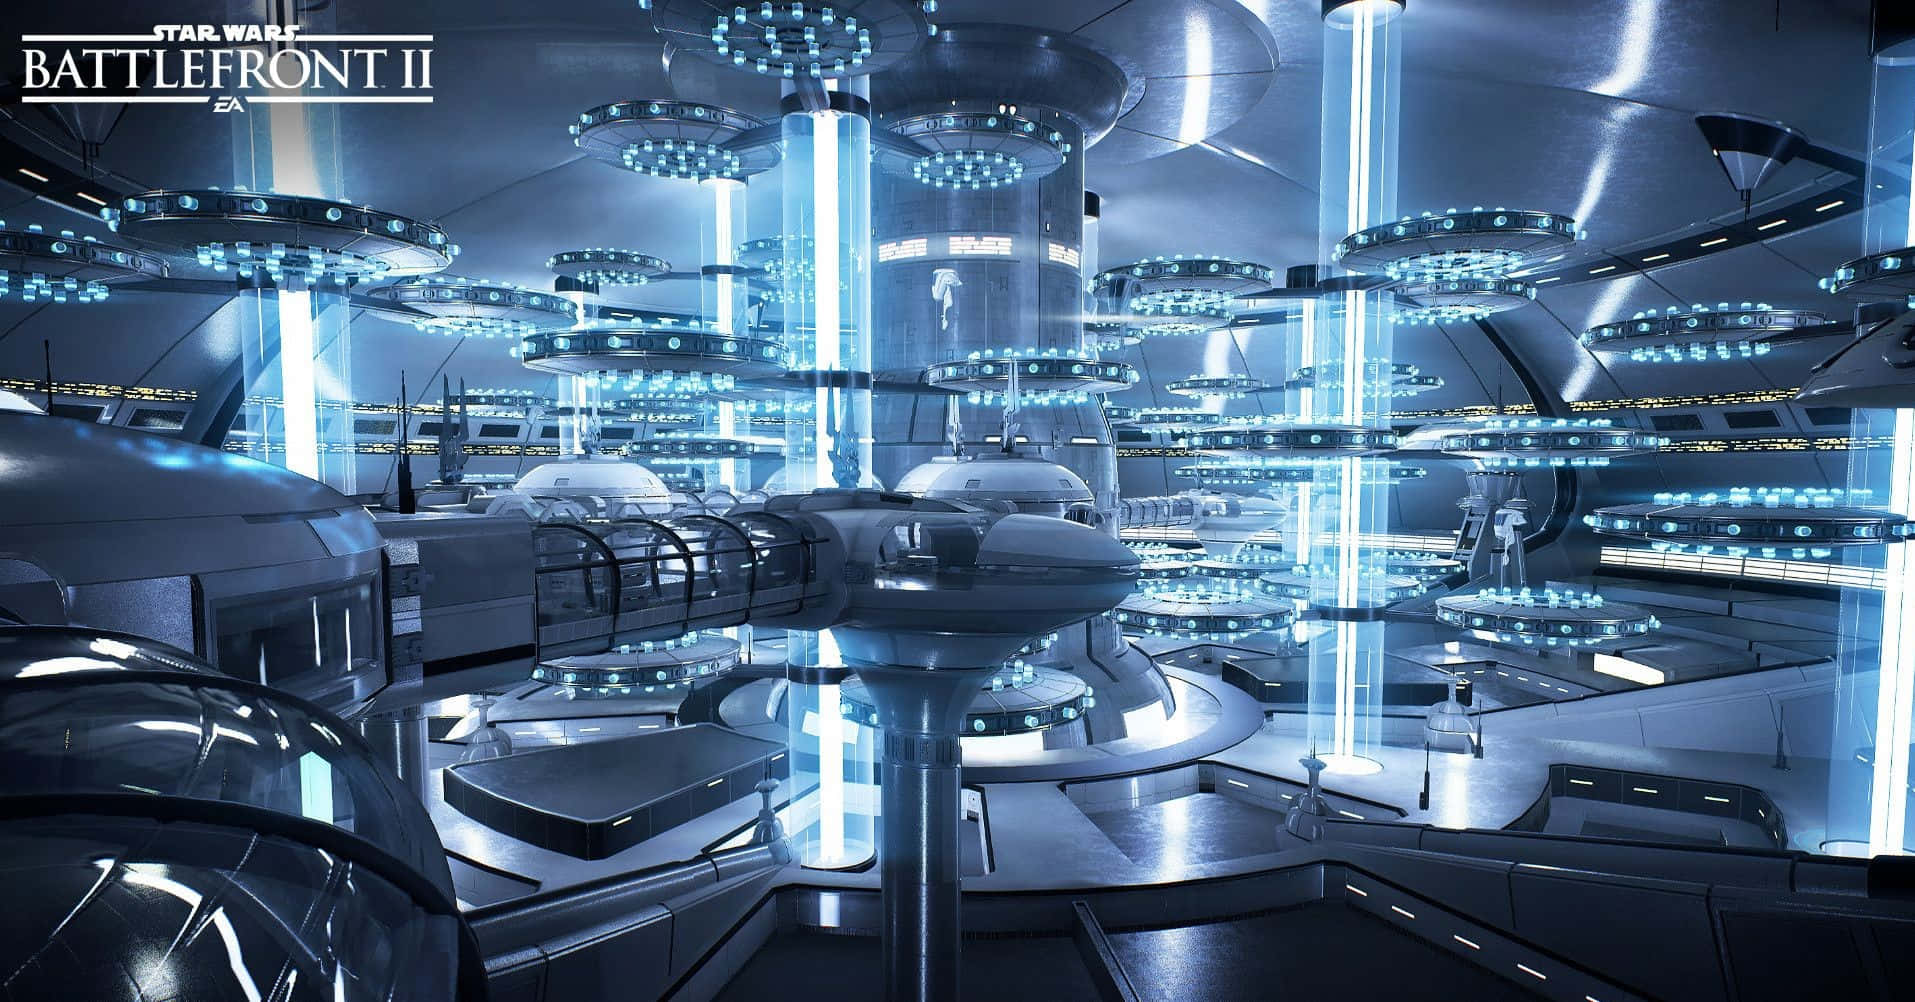 A serene night at the floating city in Kamino Wallpaper